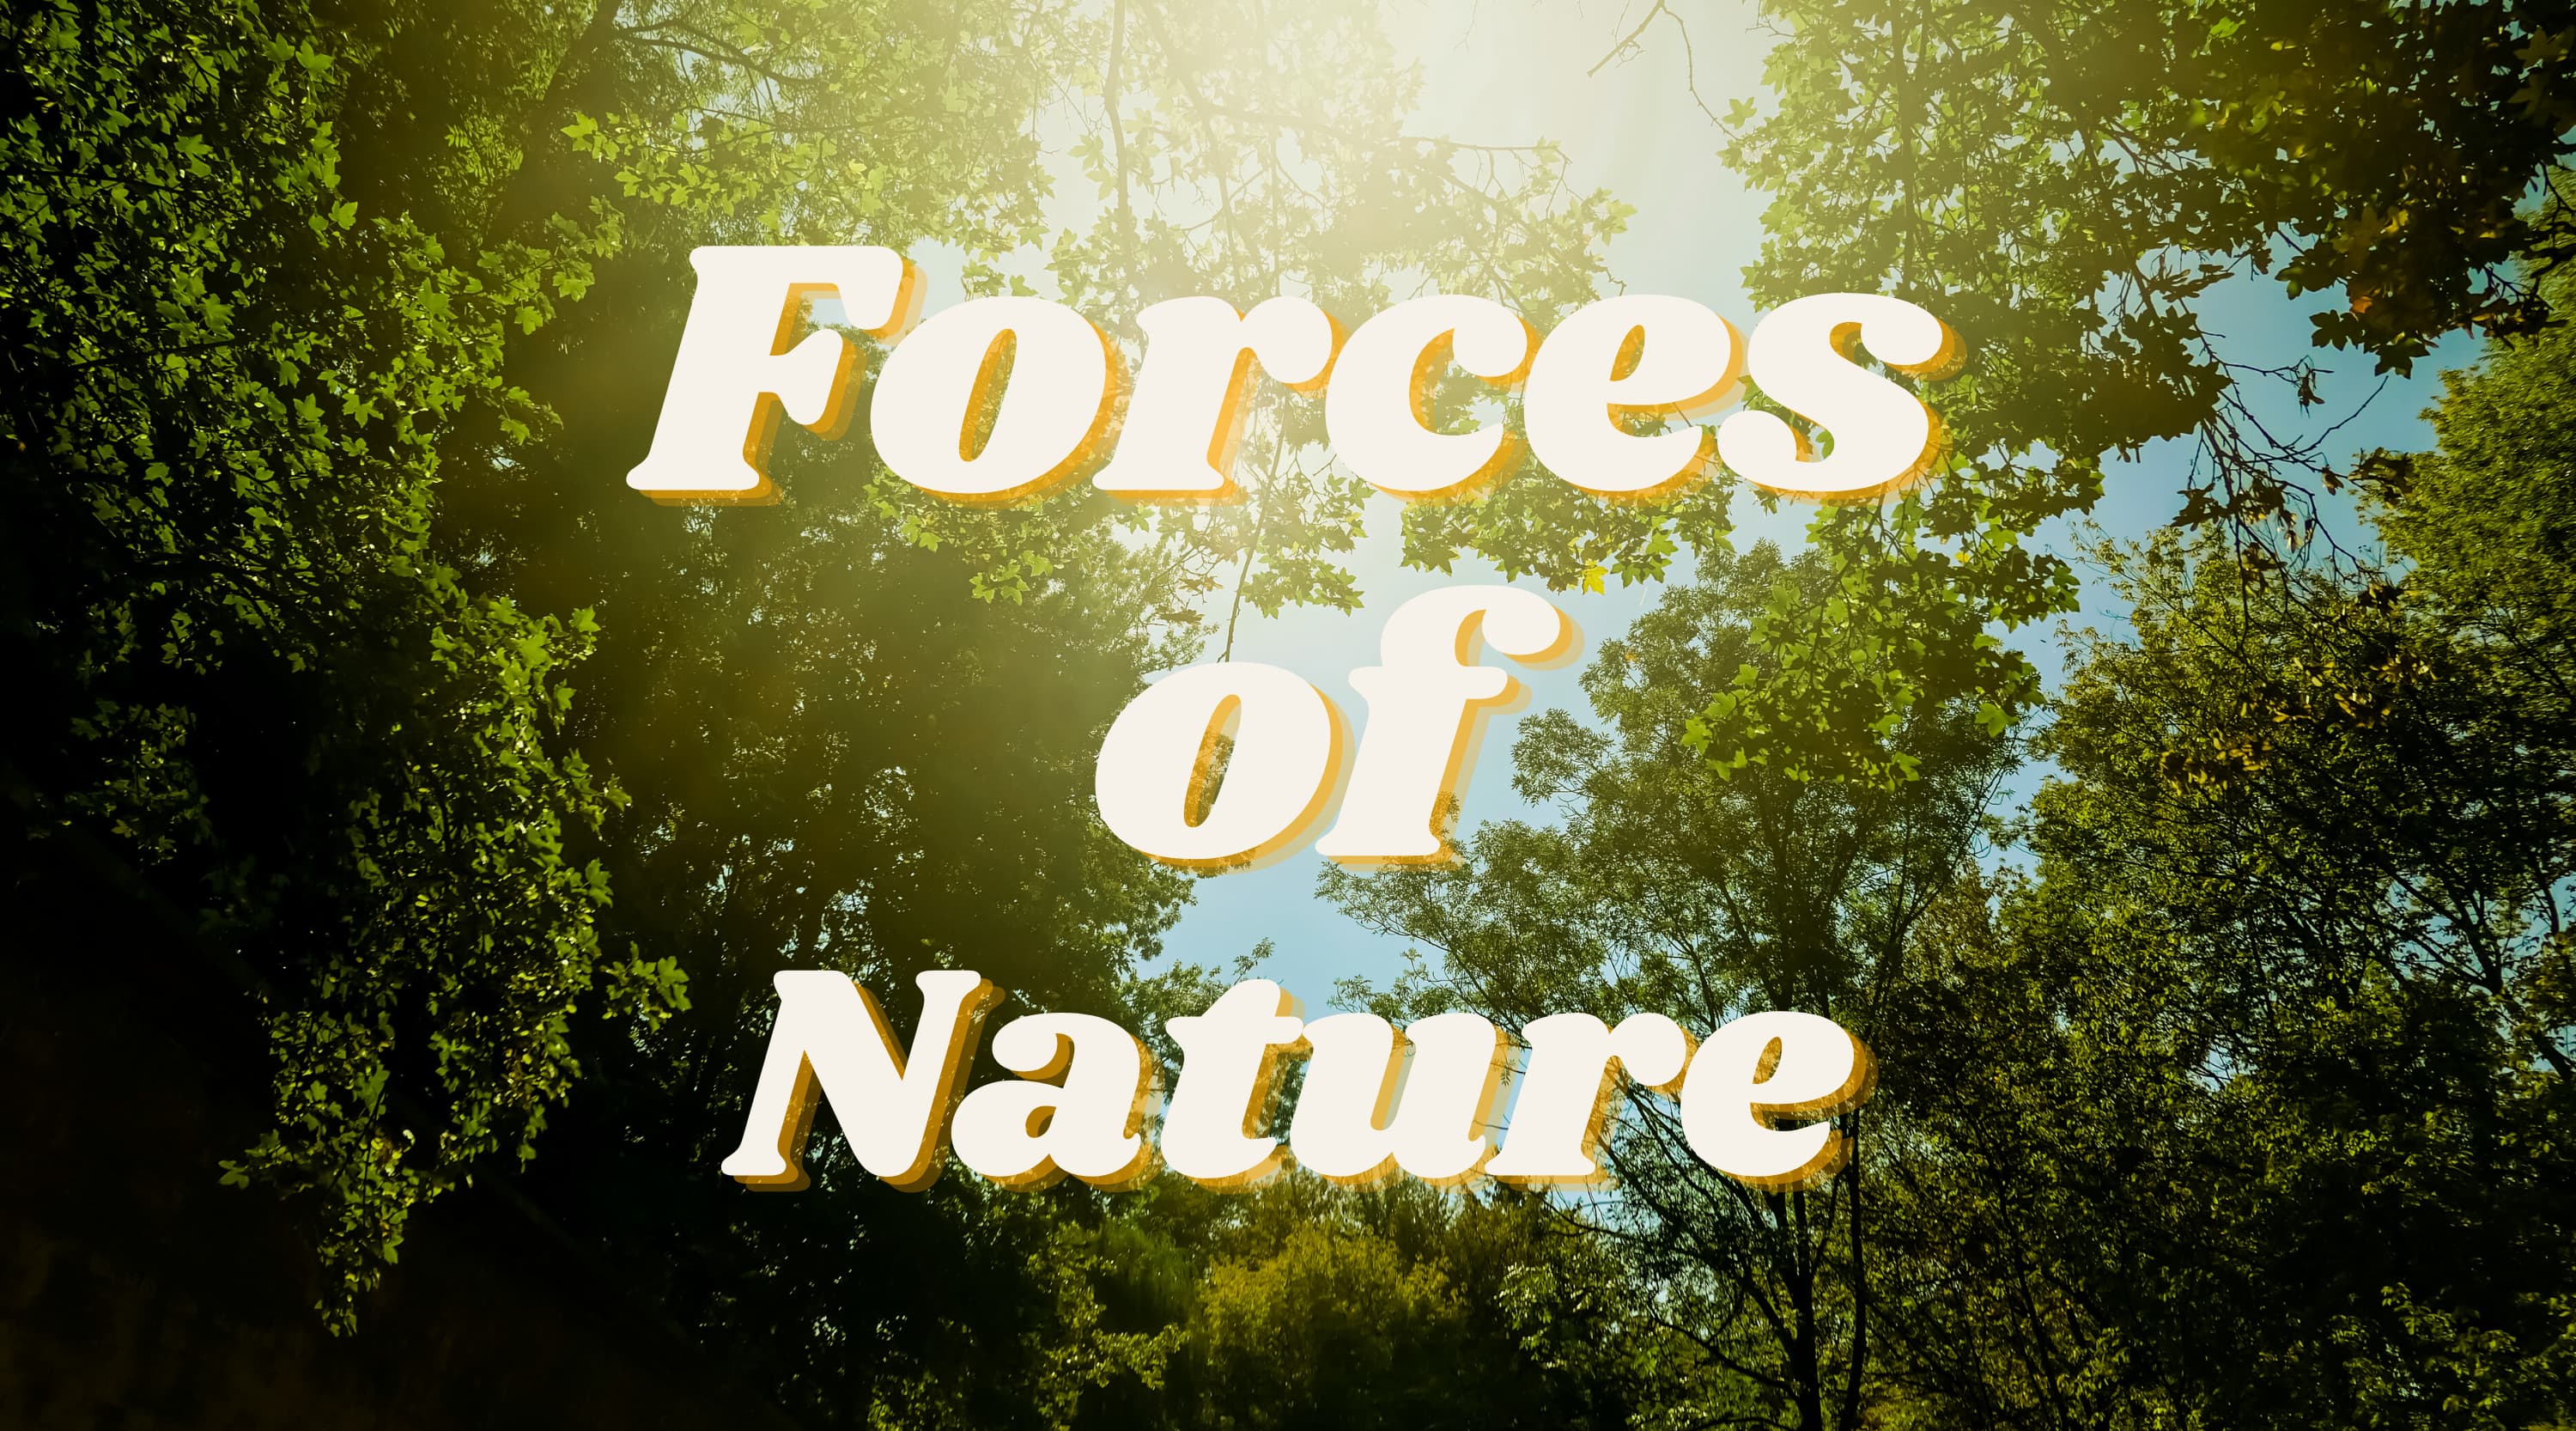 Forces of Nature